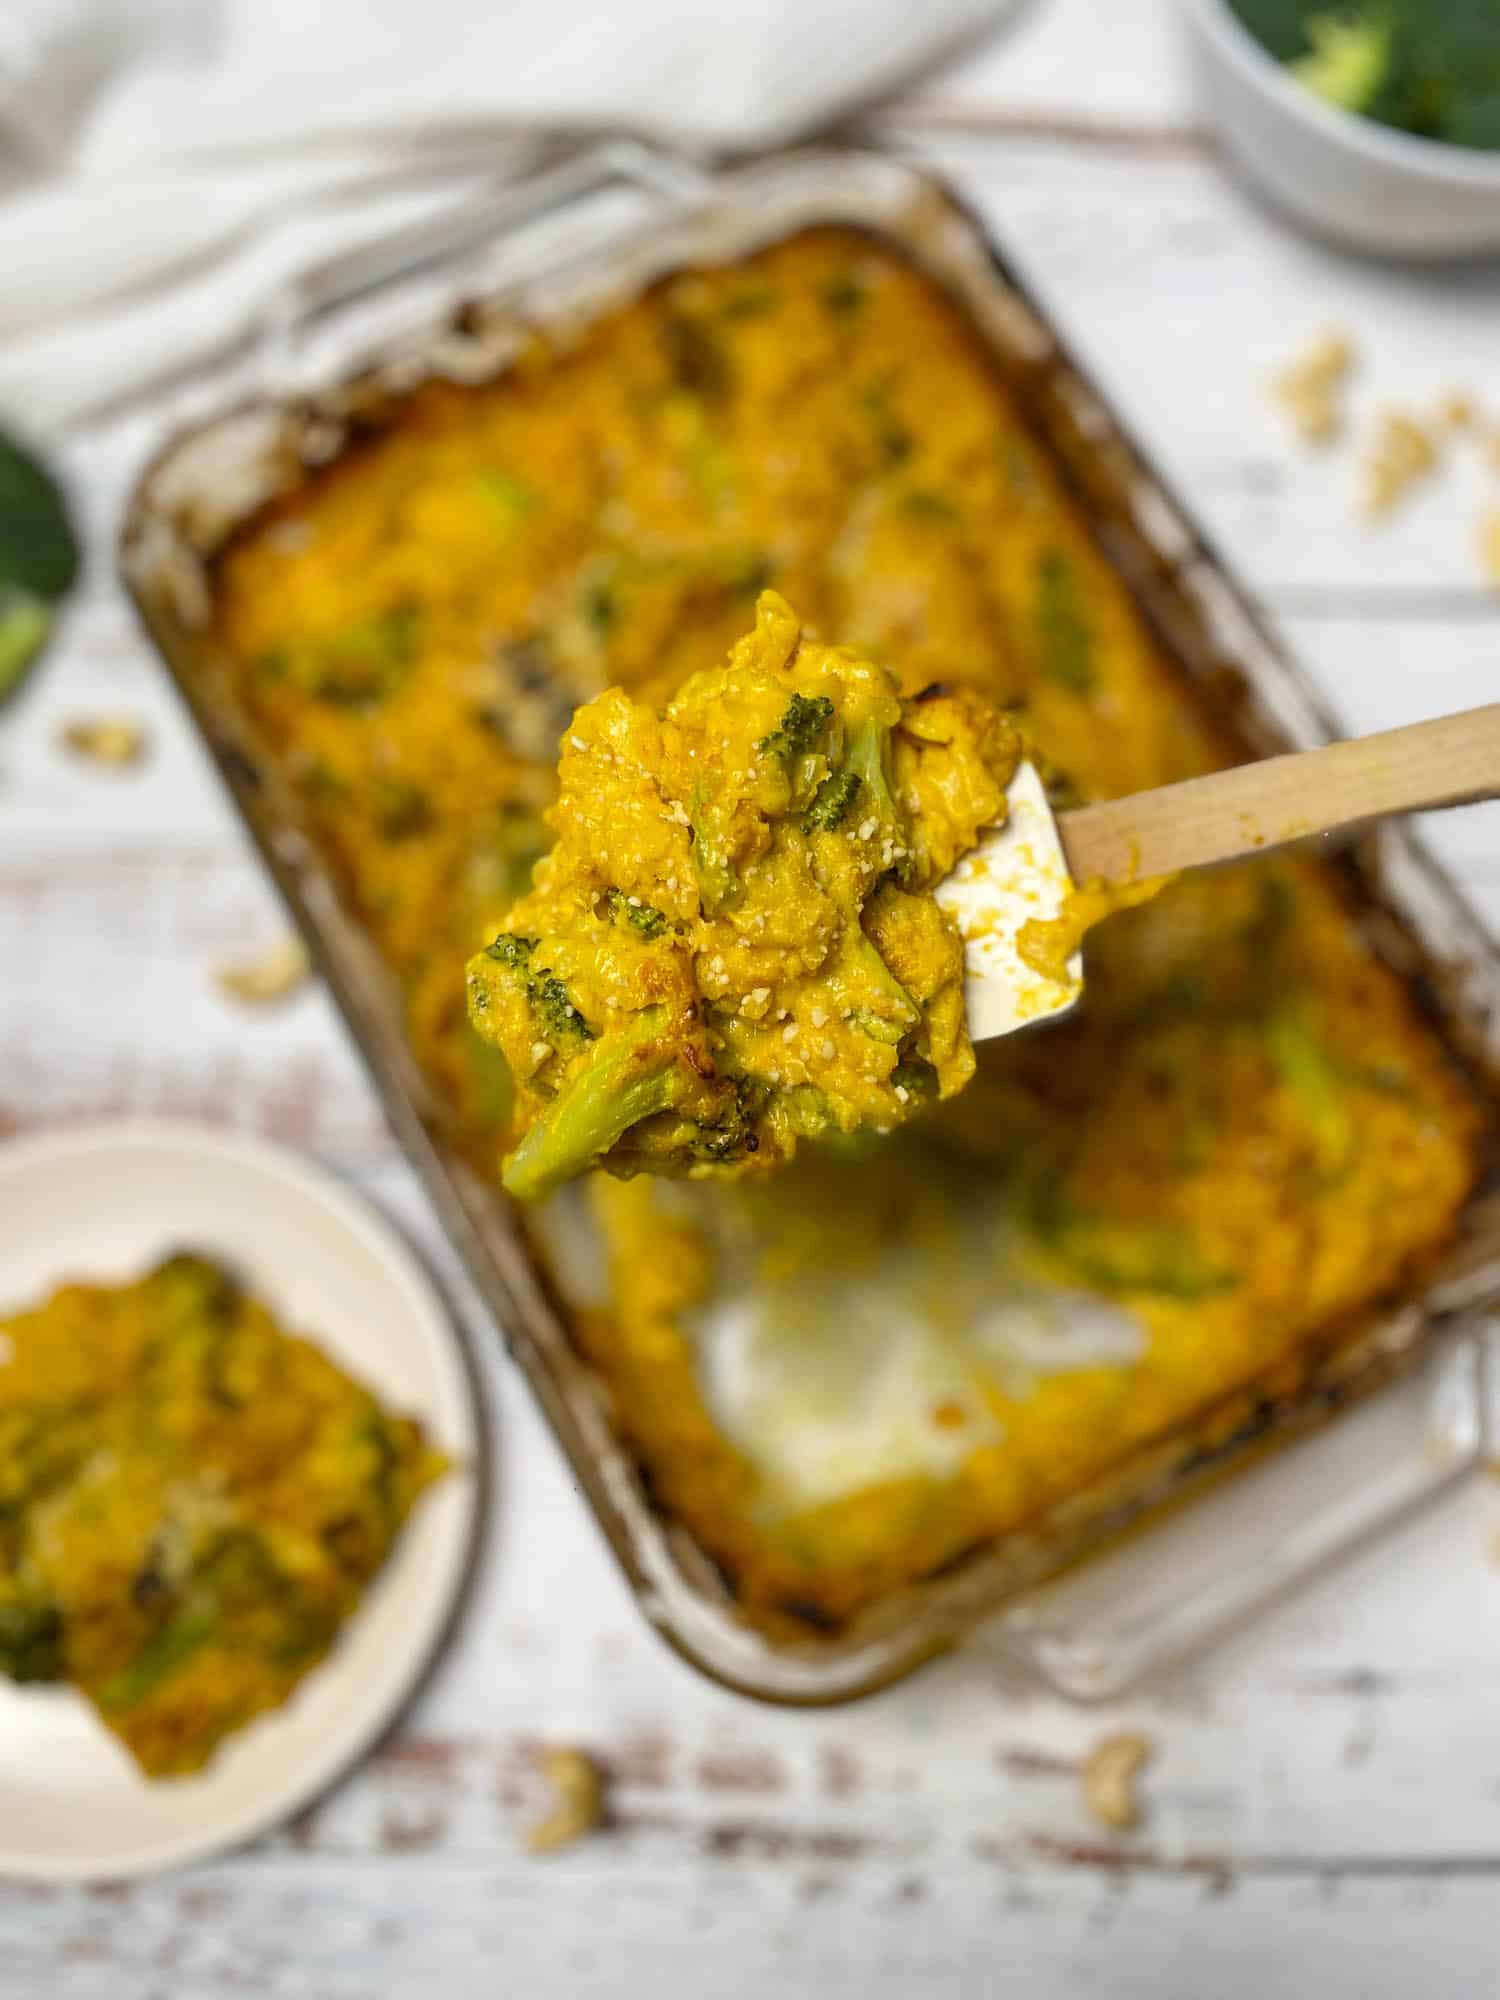 spatula lifting a scoop of broccoli rice casserole from glass baking dish